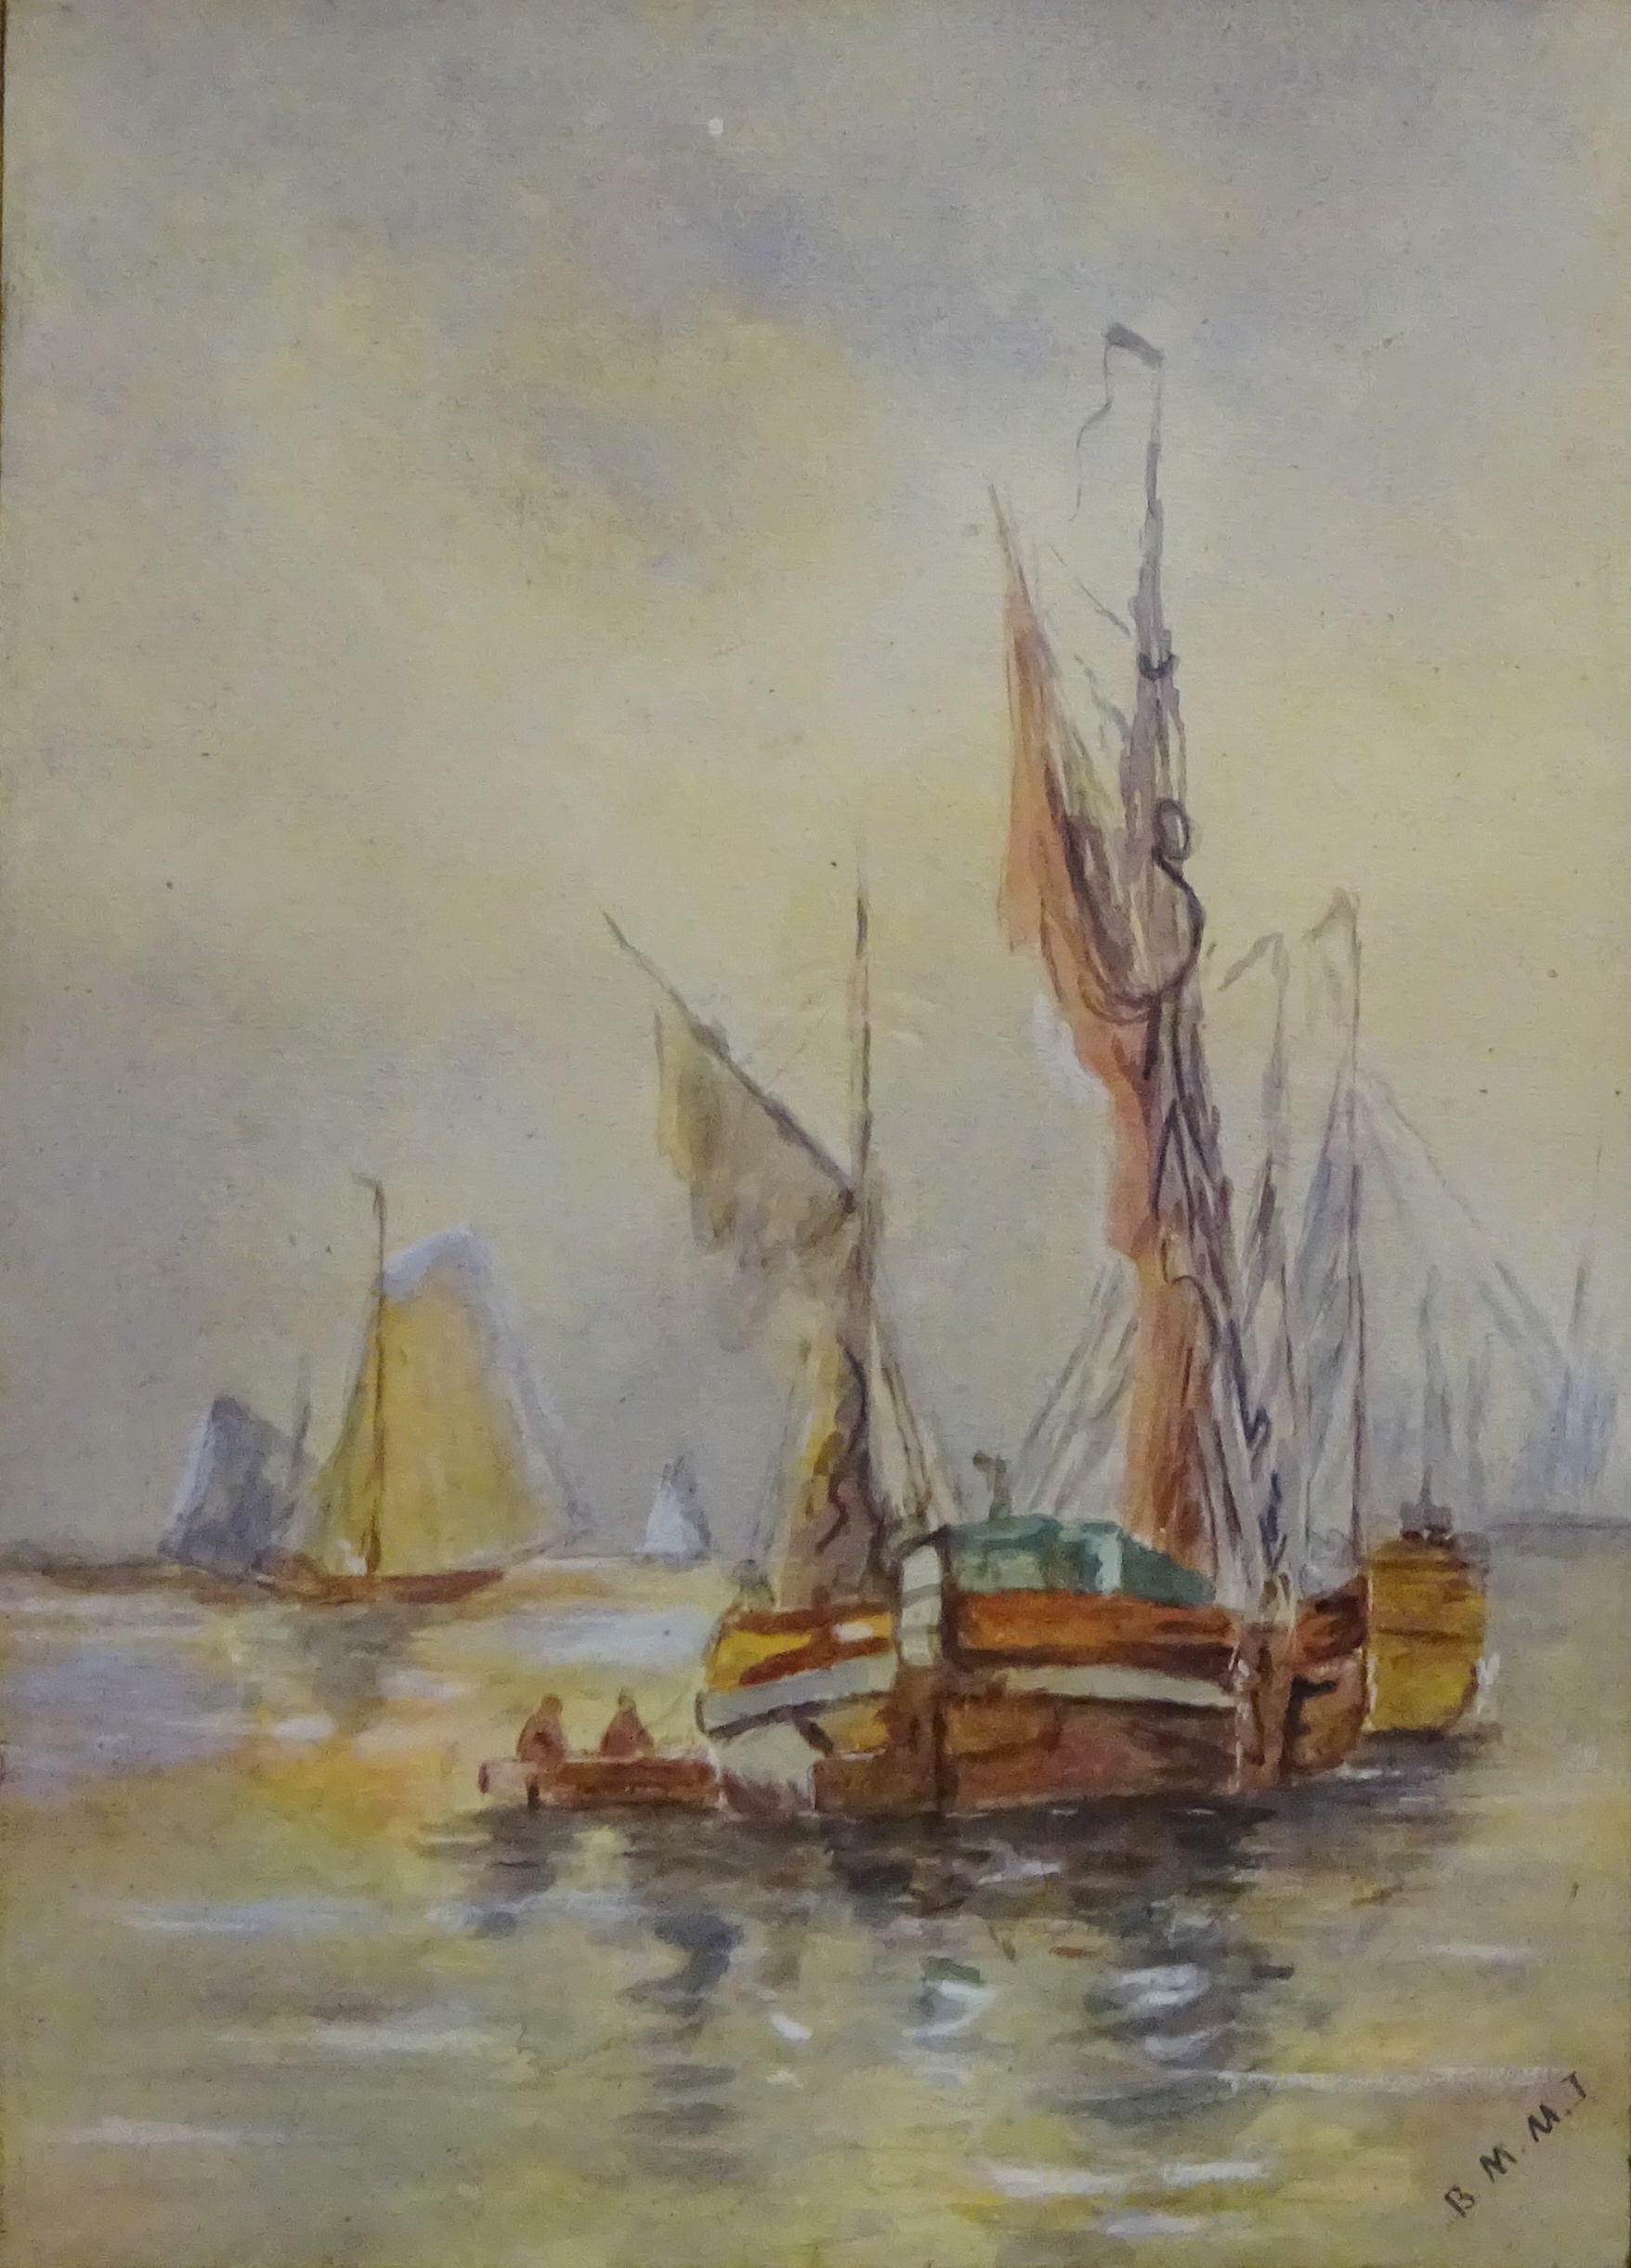 Sailing Vessels at Sea, early 20th century watercolour signed with initials B. M. M.